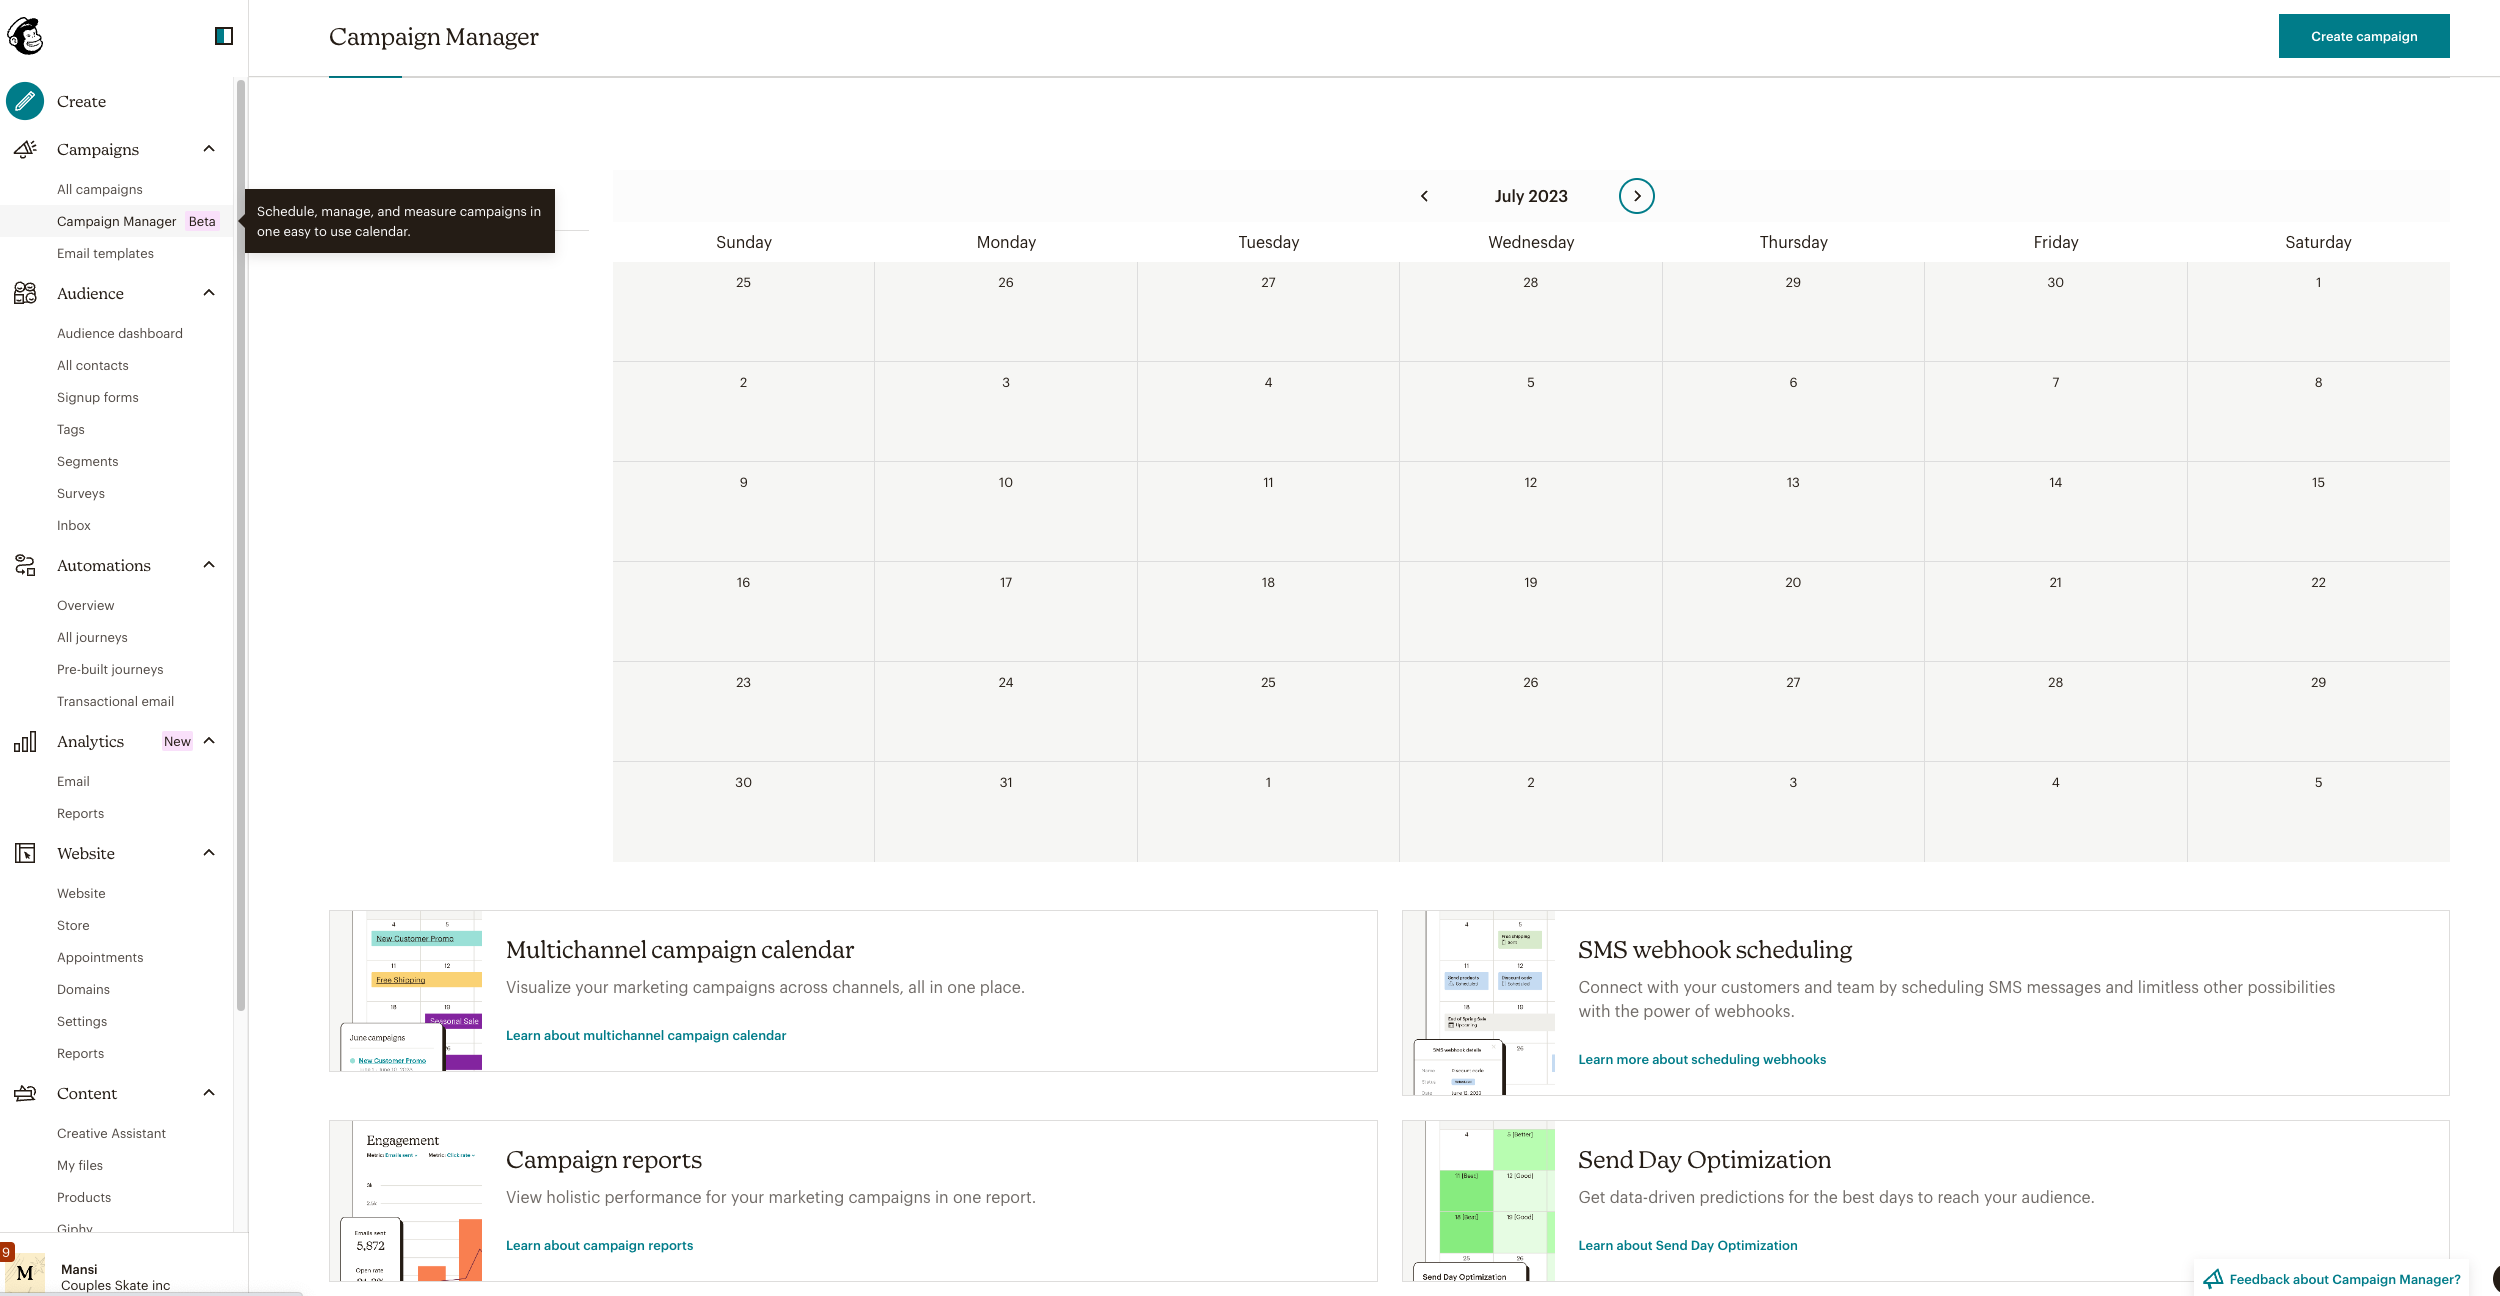 Mailchimp Software - Schedule, manage and measure campaigns in one easy-to-use calendar.